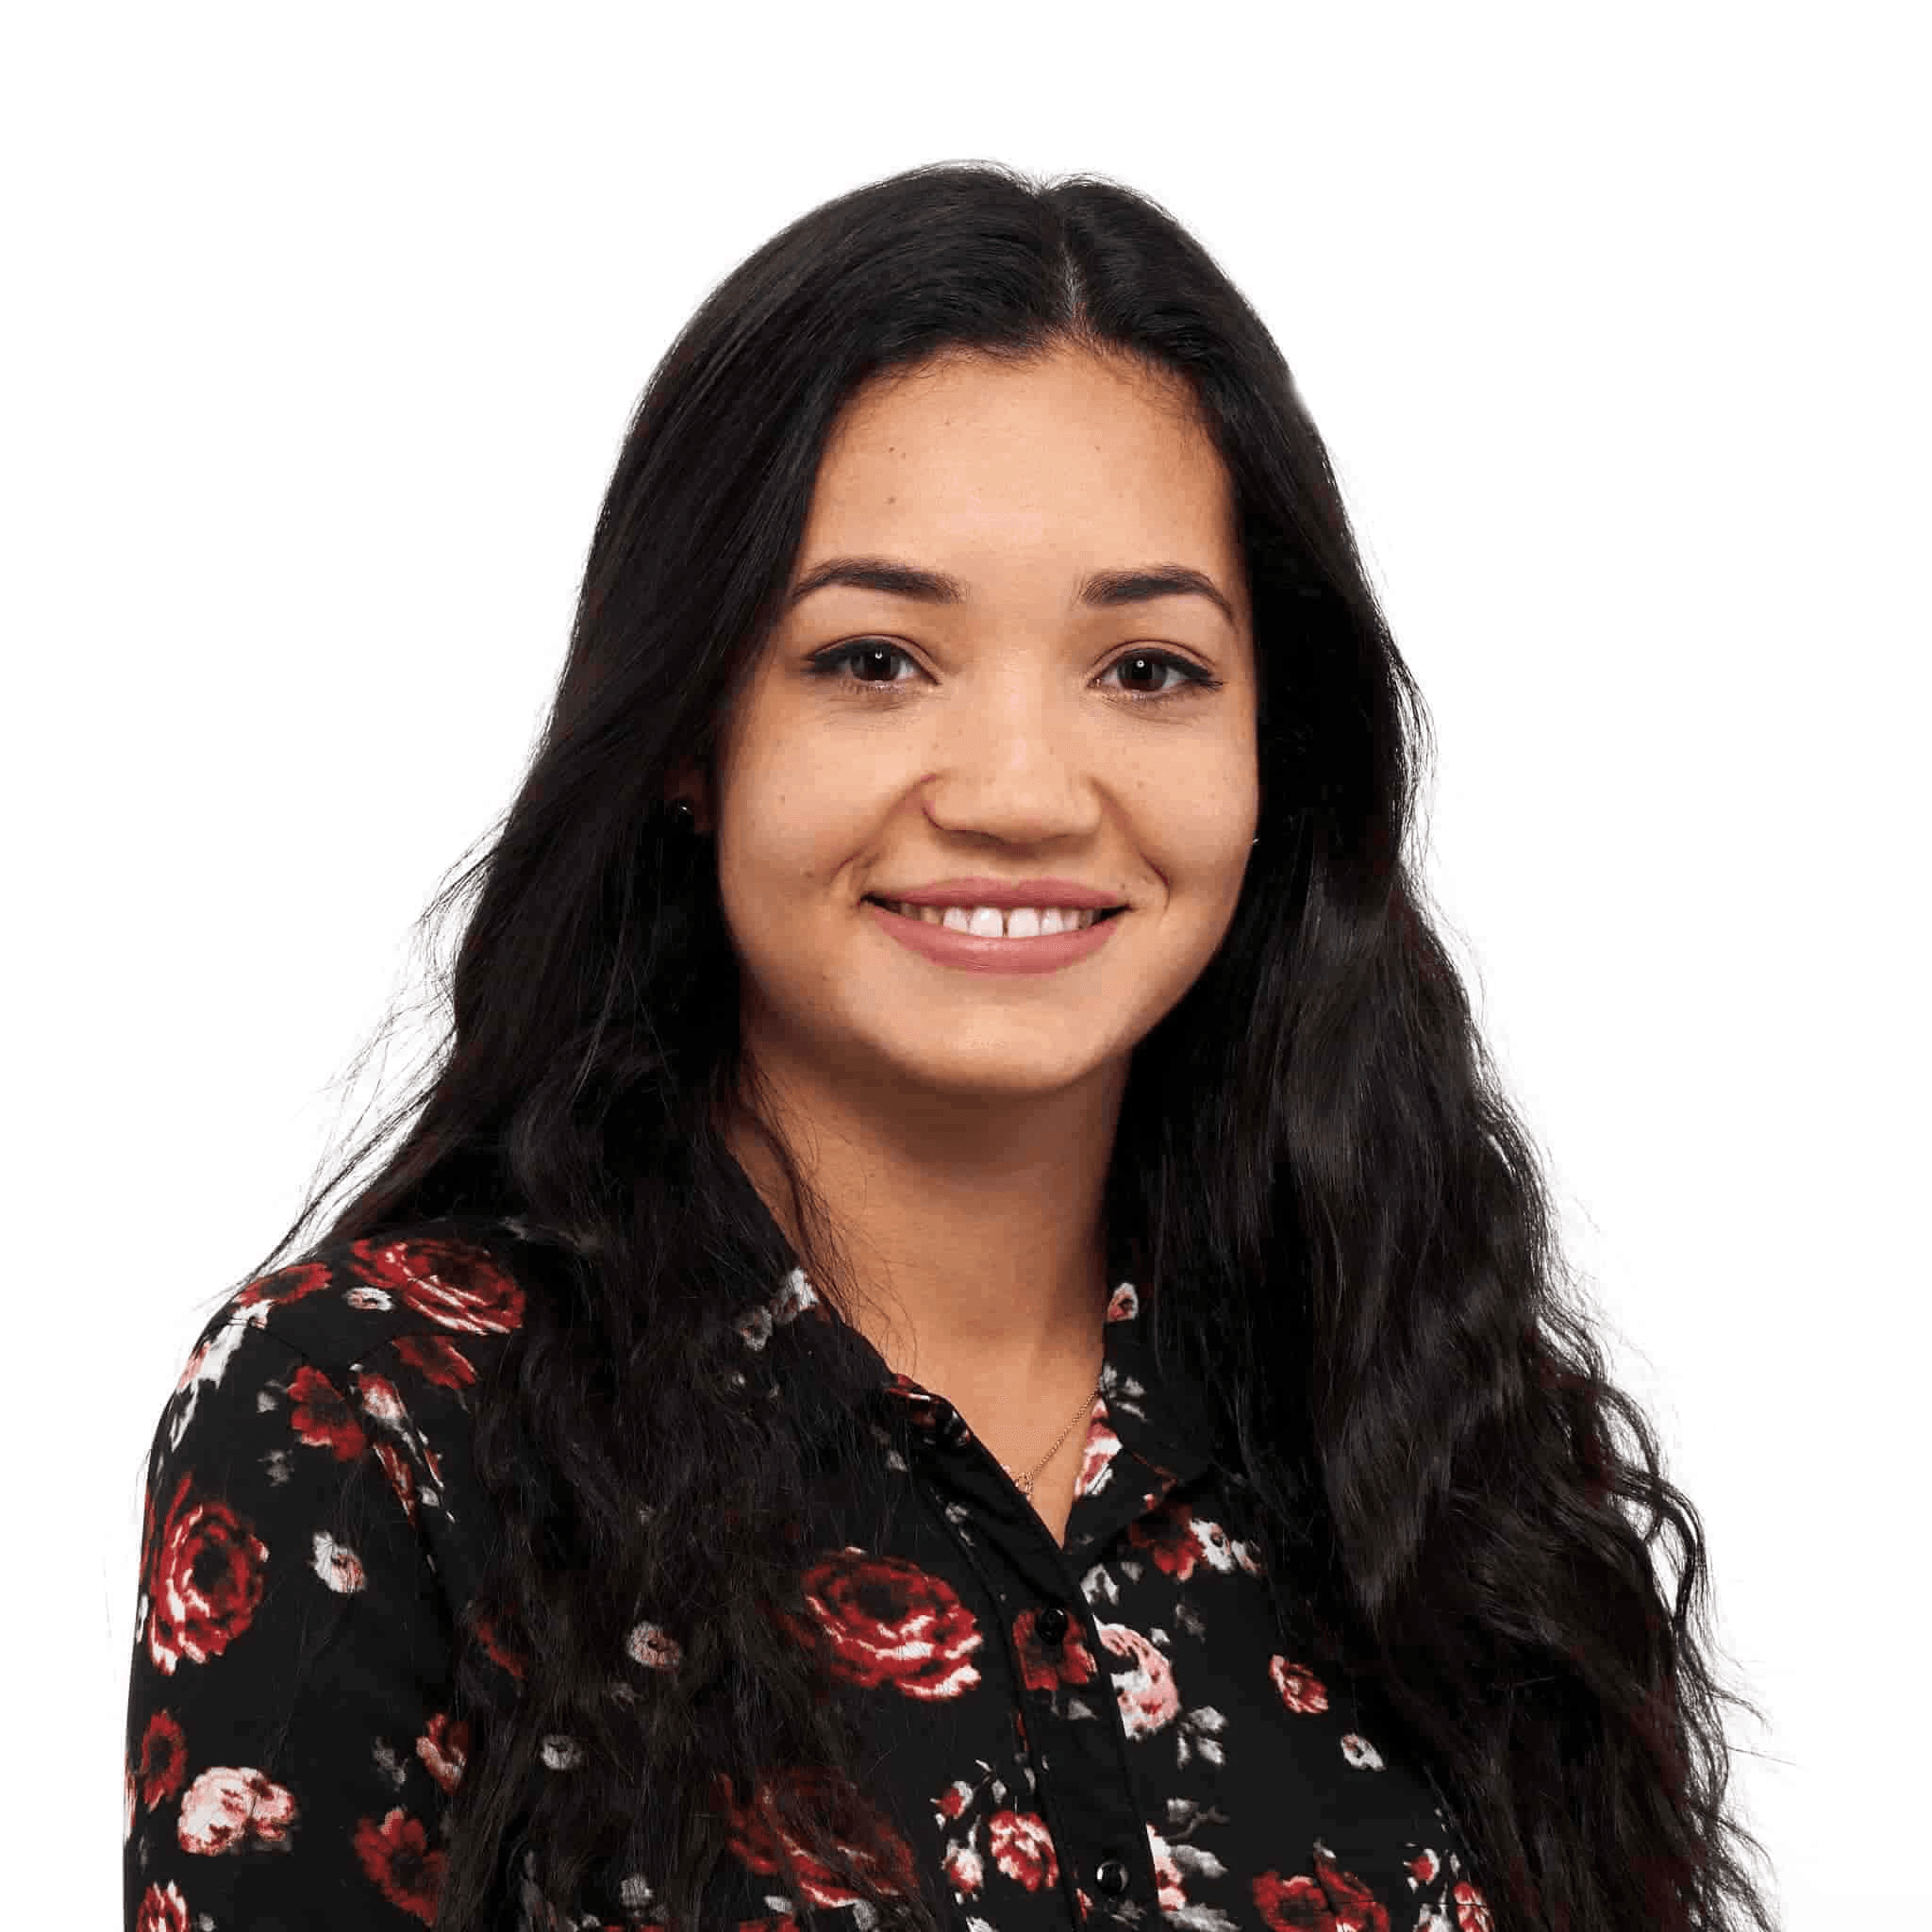 A smiling woman with long dark hair, wearing a floral print black blouse against a plain white background.